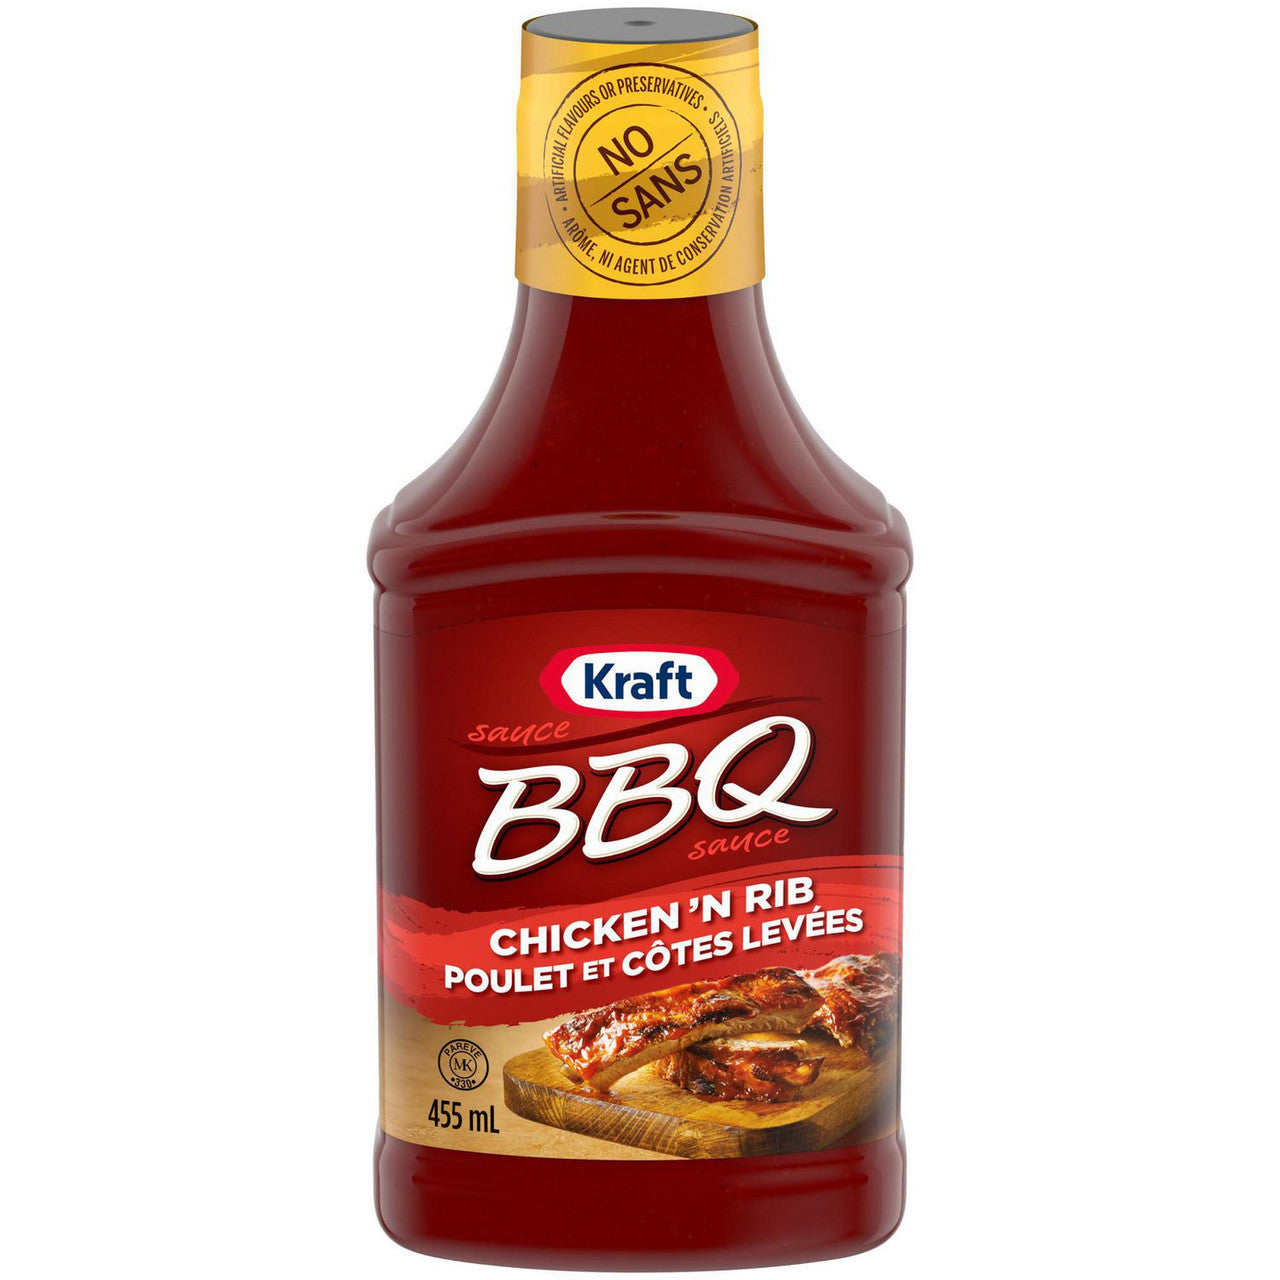 Kraft BBQ Sauce, Chicken & Rib Flavour, 455ml/15.4oz, (Imported from Canada)